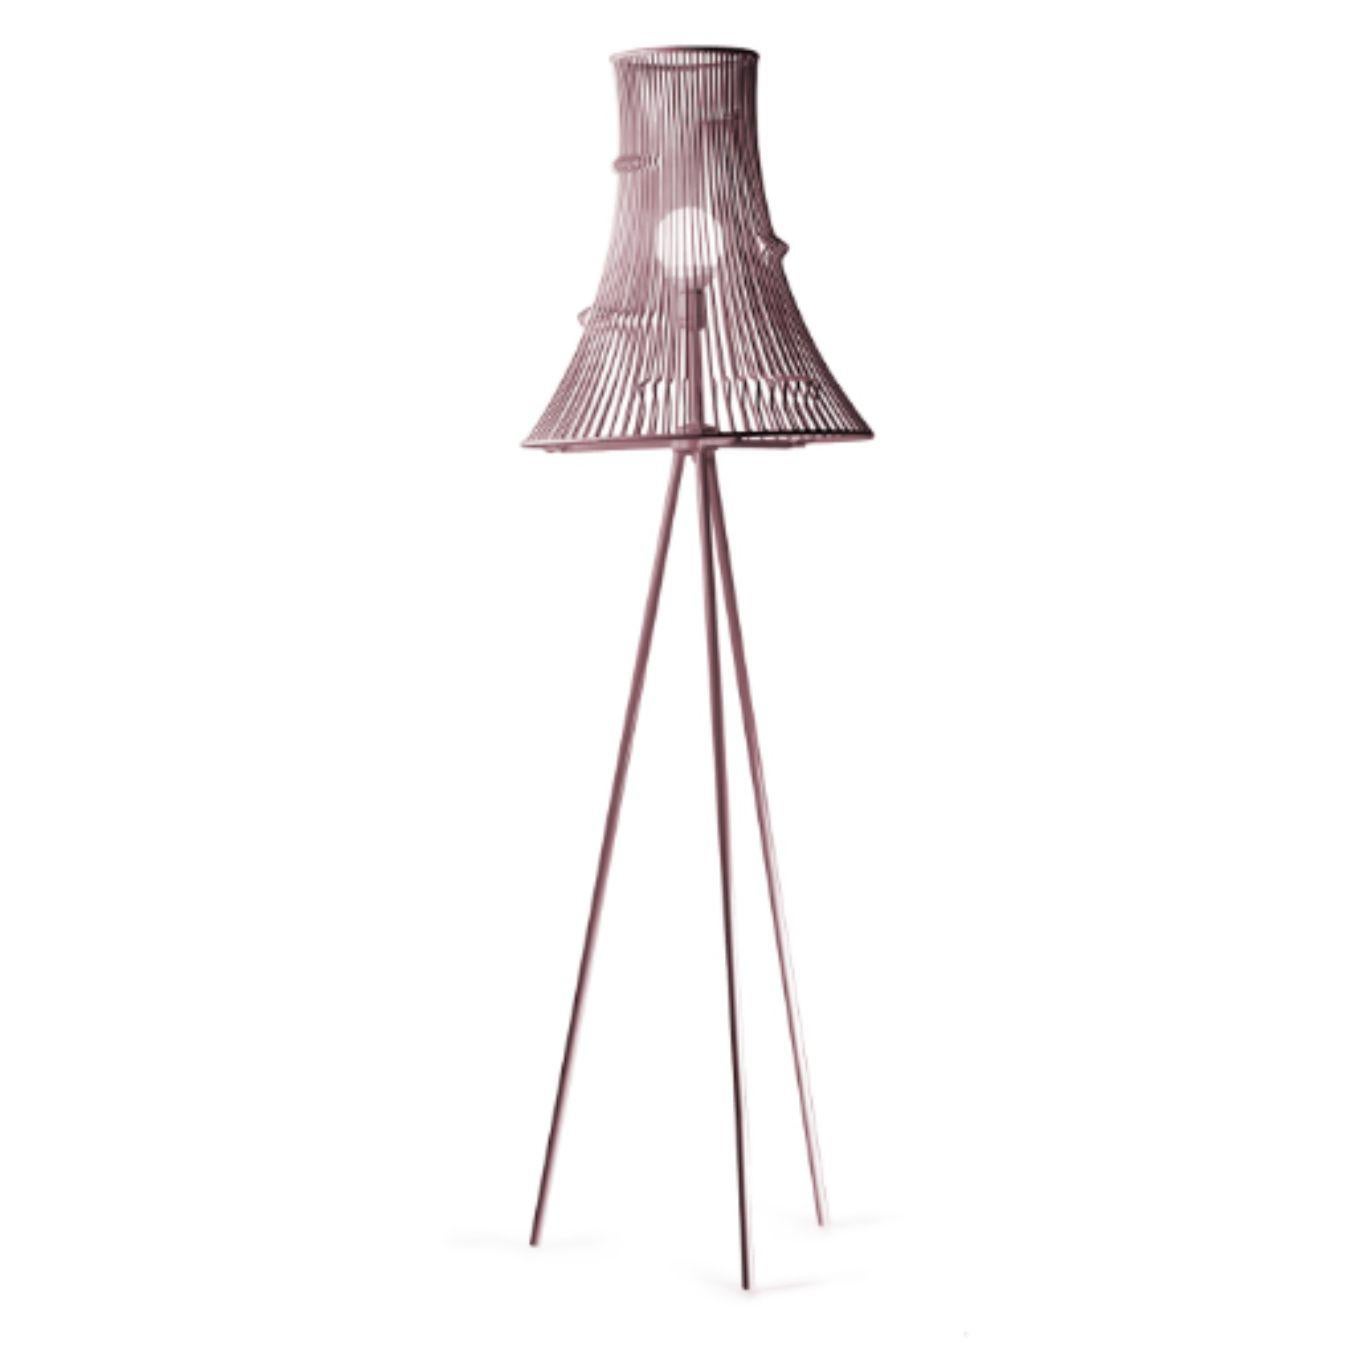 Lilac extrude floor lamp by Dooq.
Dimensions: W 50 x D 50 x H 175 cm.
Materials: lacquered metal, polished or brushed metal,.
Also available in different colors and materials.

Information:
230V/50Hz
E27/1x20W LED
120V/60Hz
E26/1x15W LED
bulb not